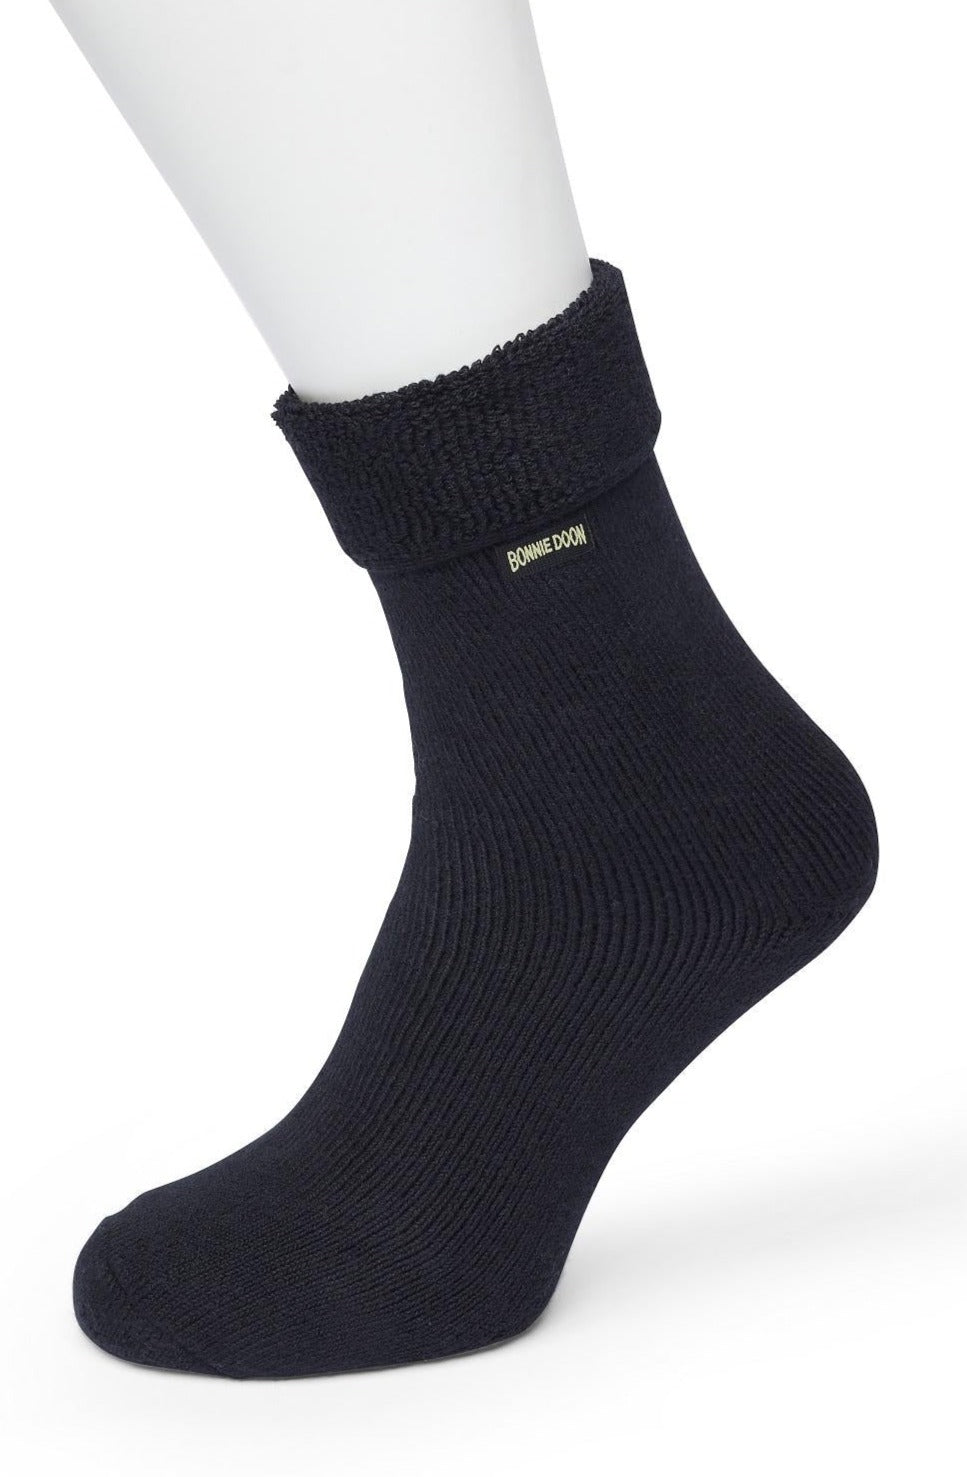 Bonnie Doon BP211123 Cushion Roll Down Sock - Black thick and warm cotton ankle socks with a turn down cuff and flat toe seam.